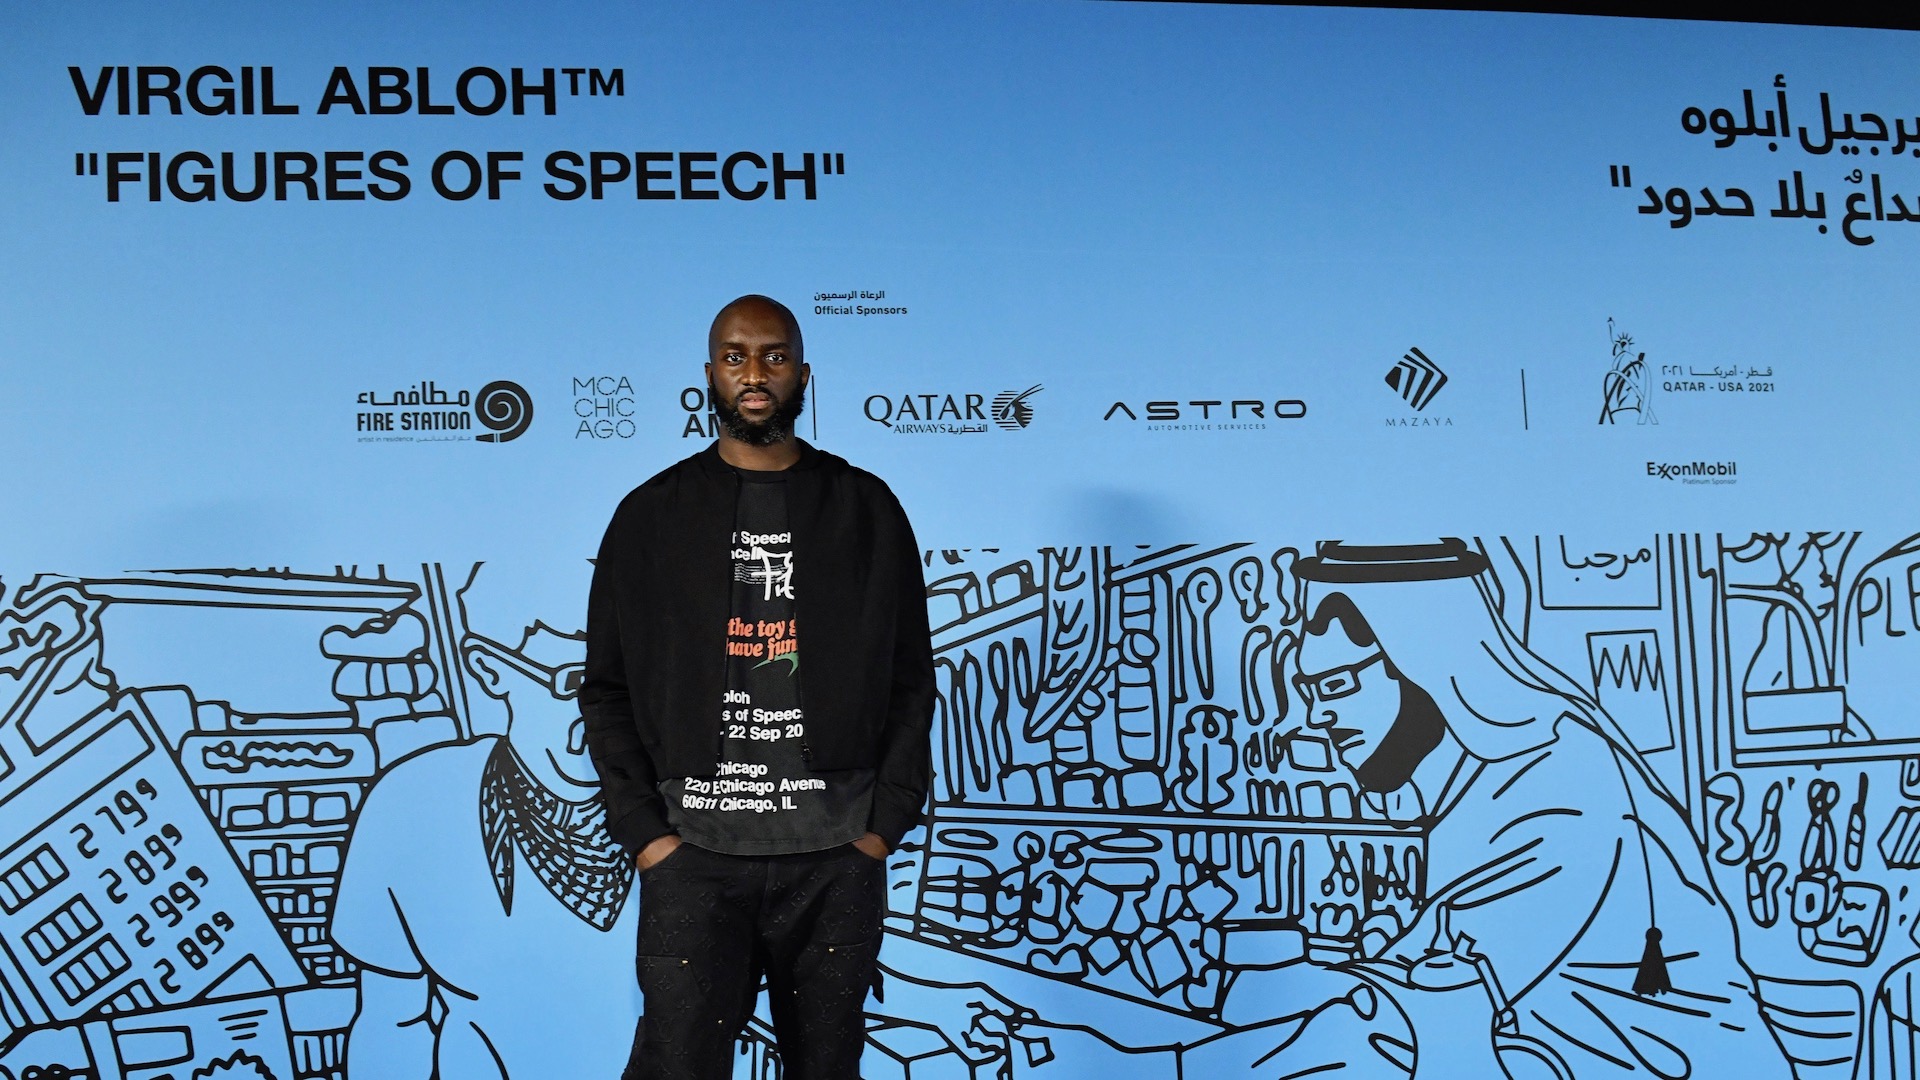 Virgil Abloh: Figures of Speech Exhibition at the Brooklyn Museum